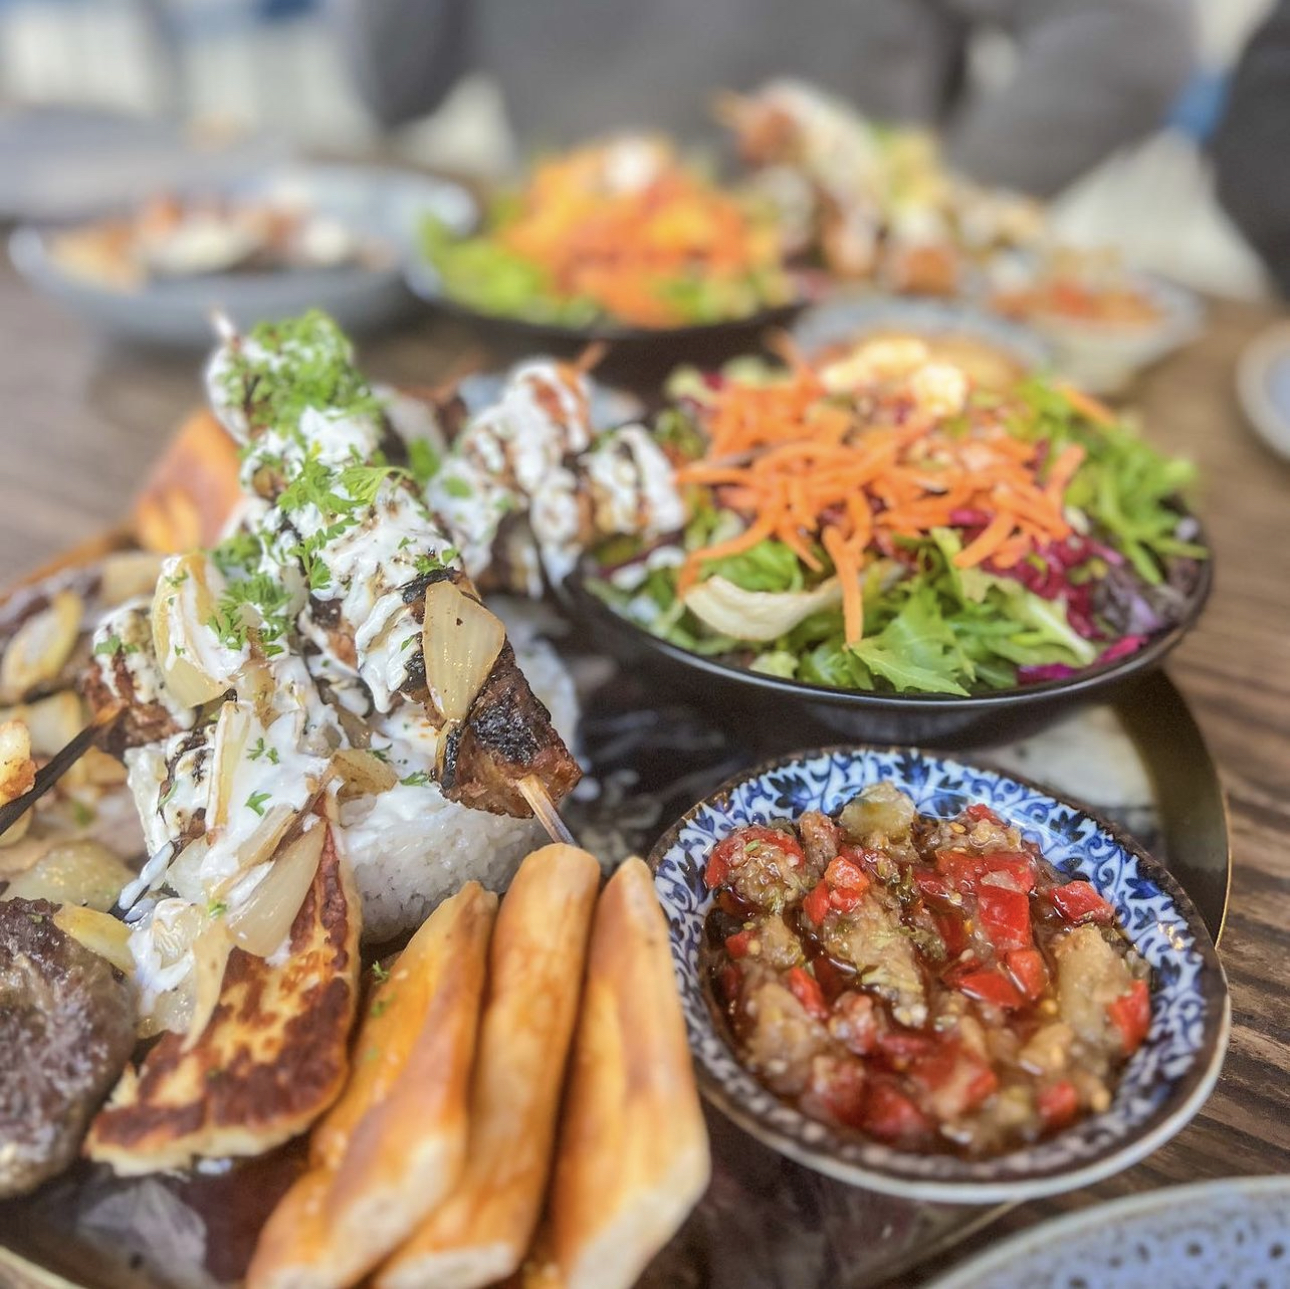 Embark on a Culinary Adventure at Grill & Green, a delicious and healthy Mediterranean Restaurant Oasis in Papamoa Beach